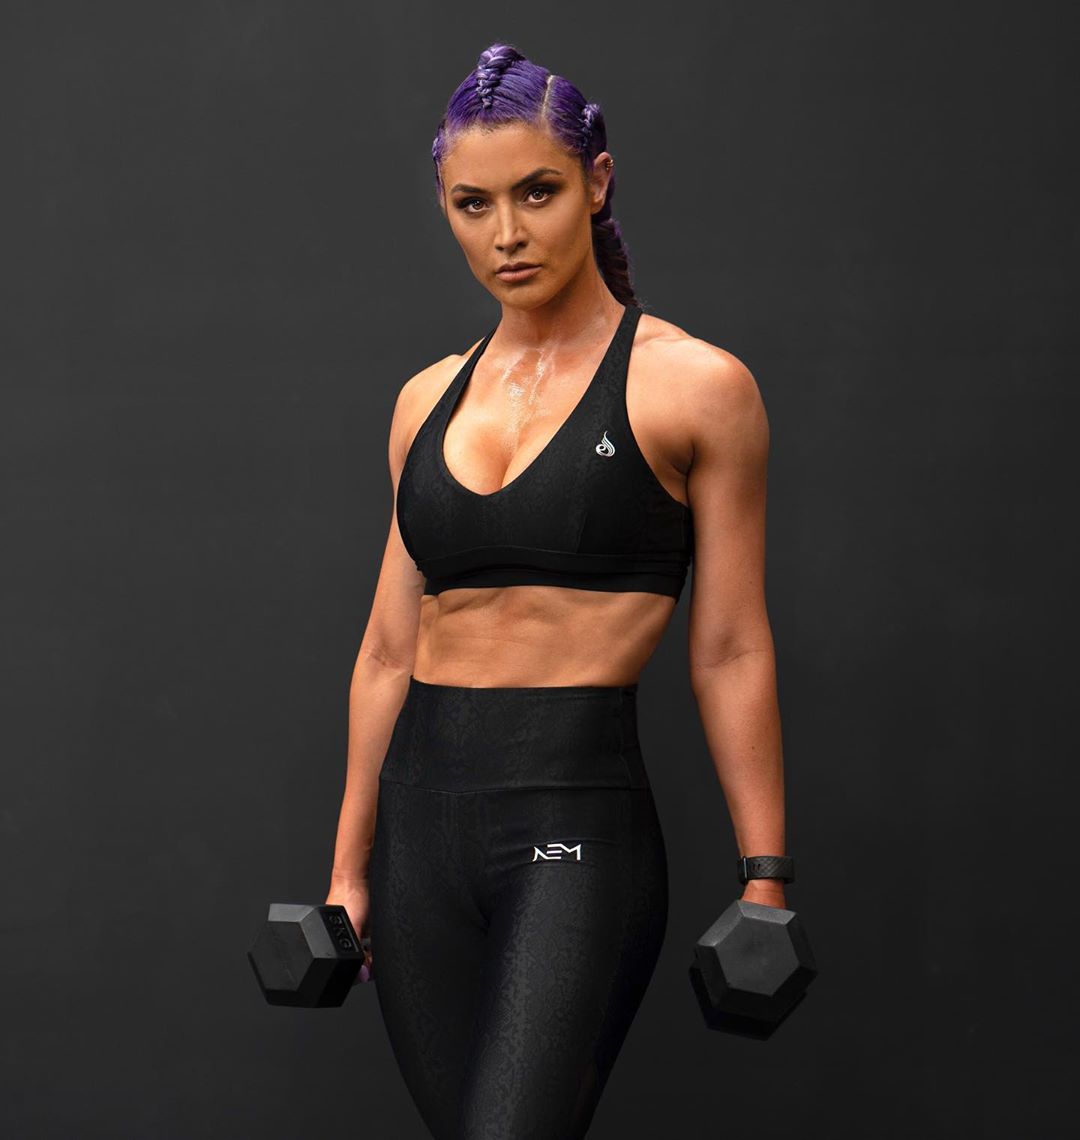 Top 10 Popular Instagram Fitness Models And Influencers 2023